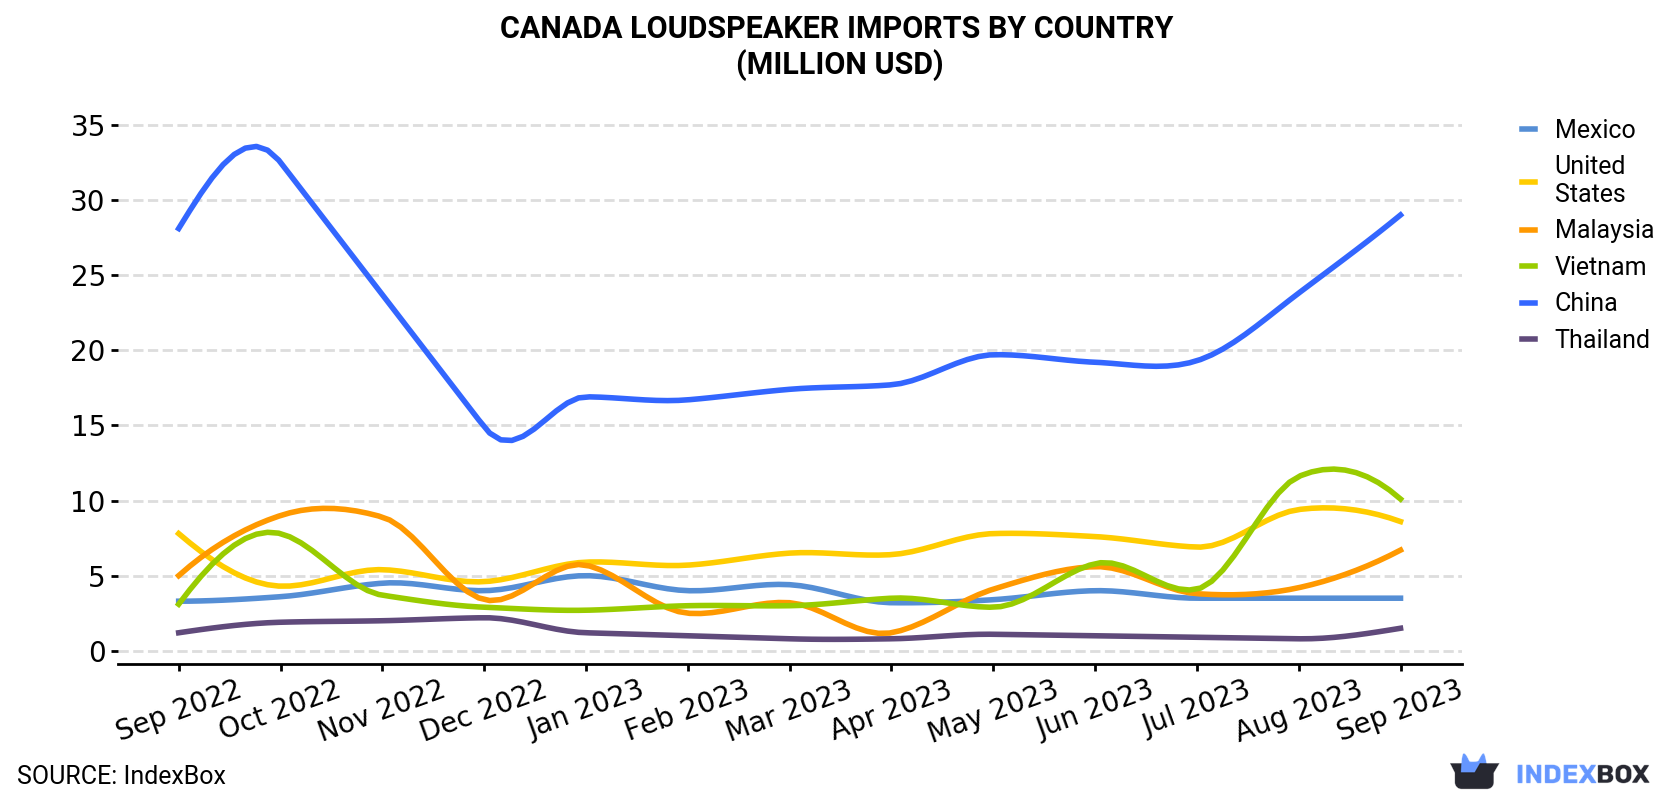 Canada Loudspeaker Imports By Country (Million USD)